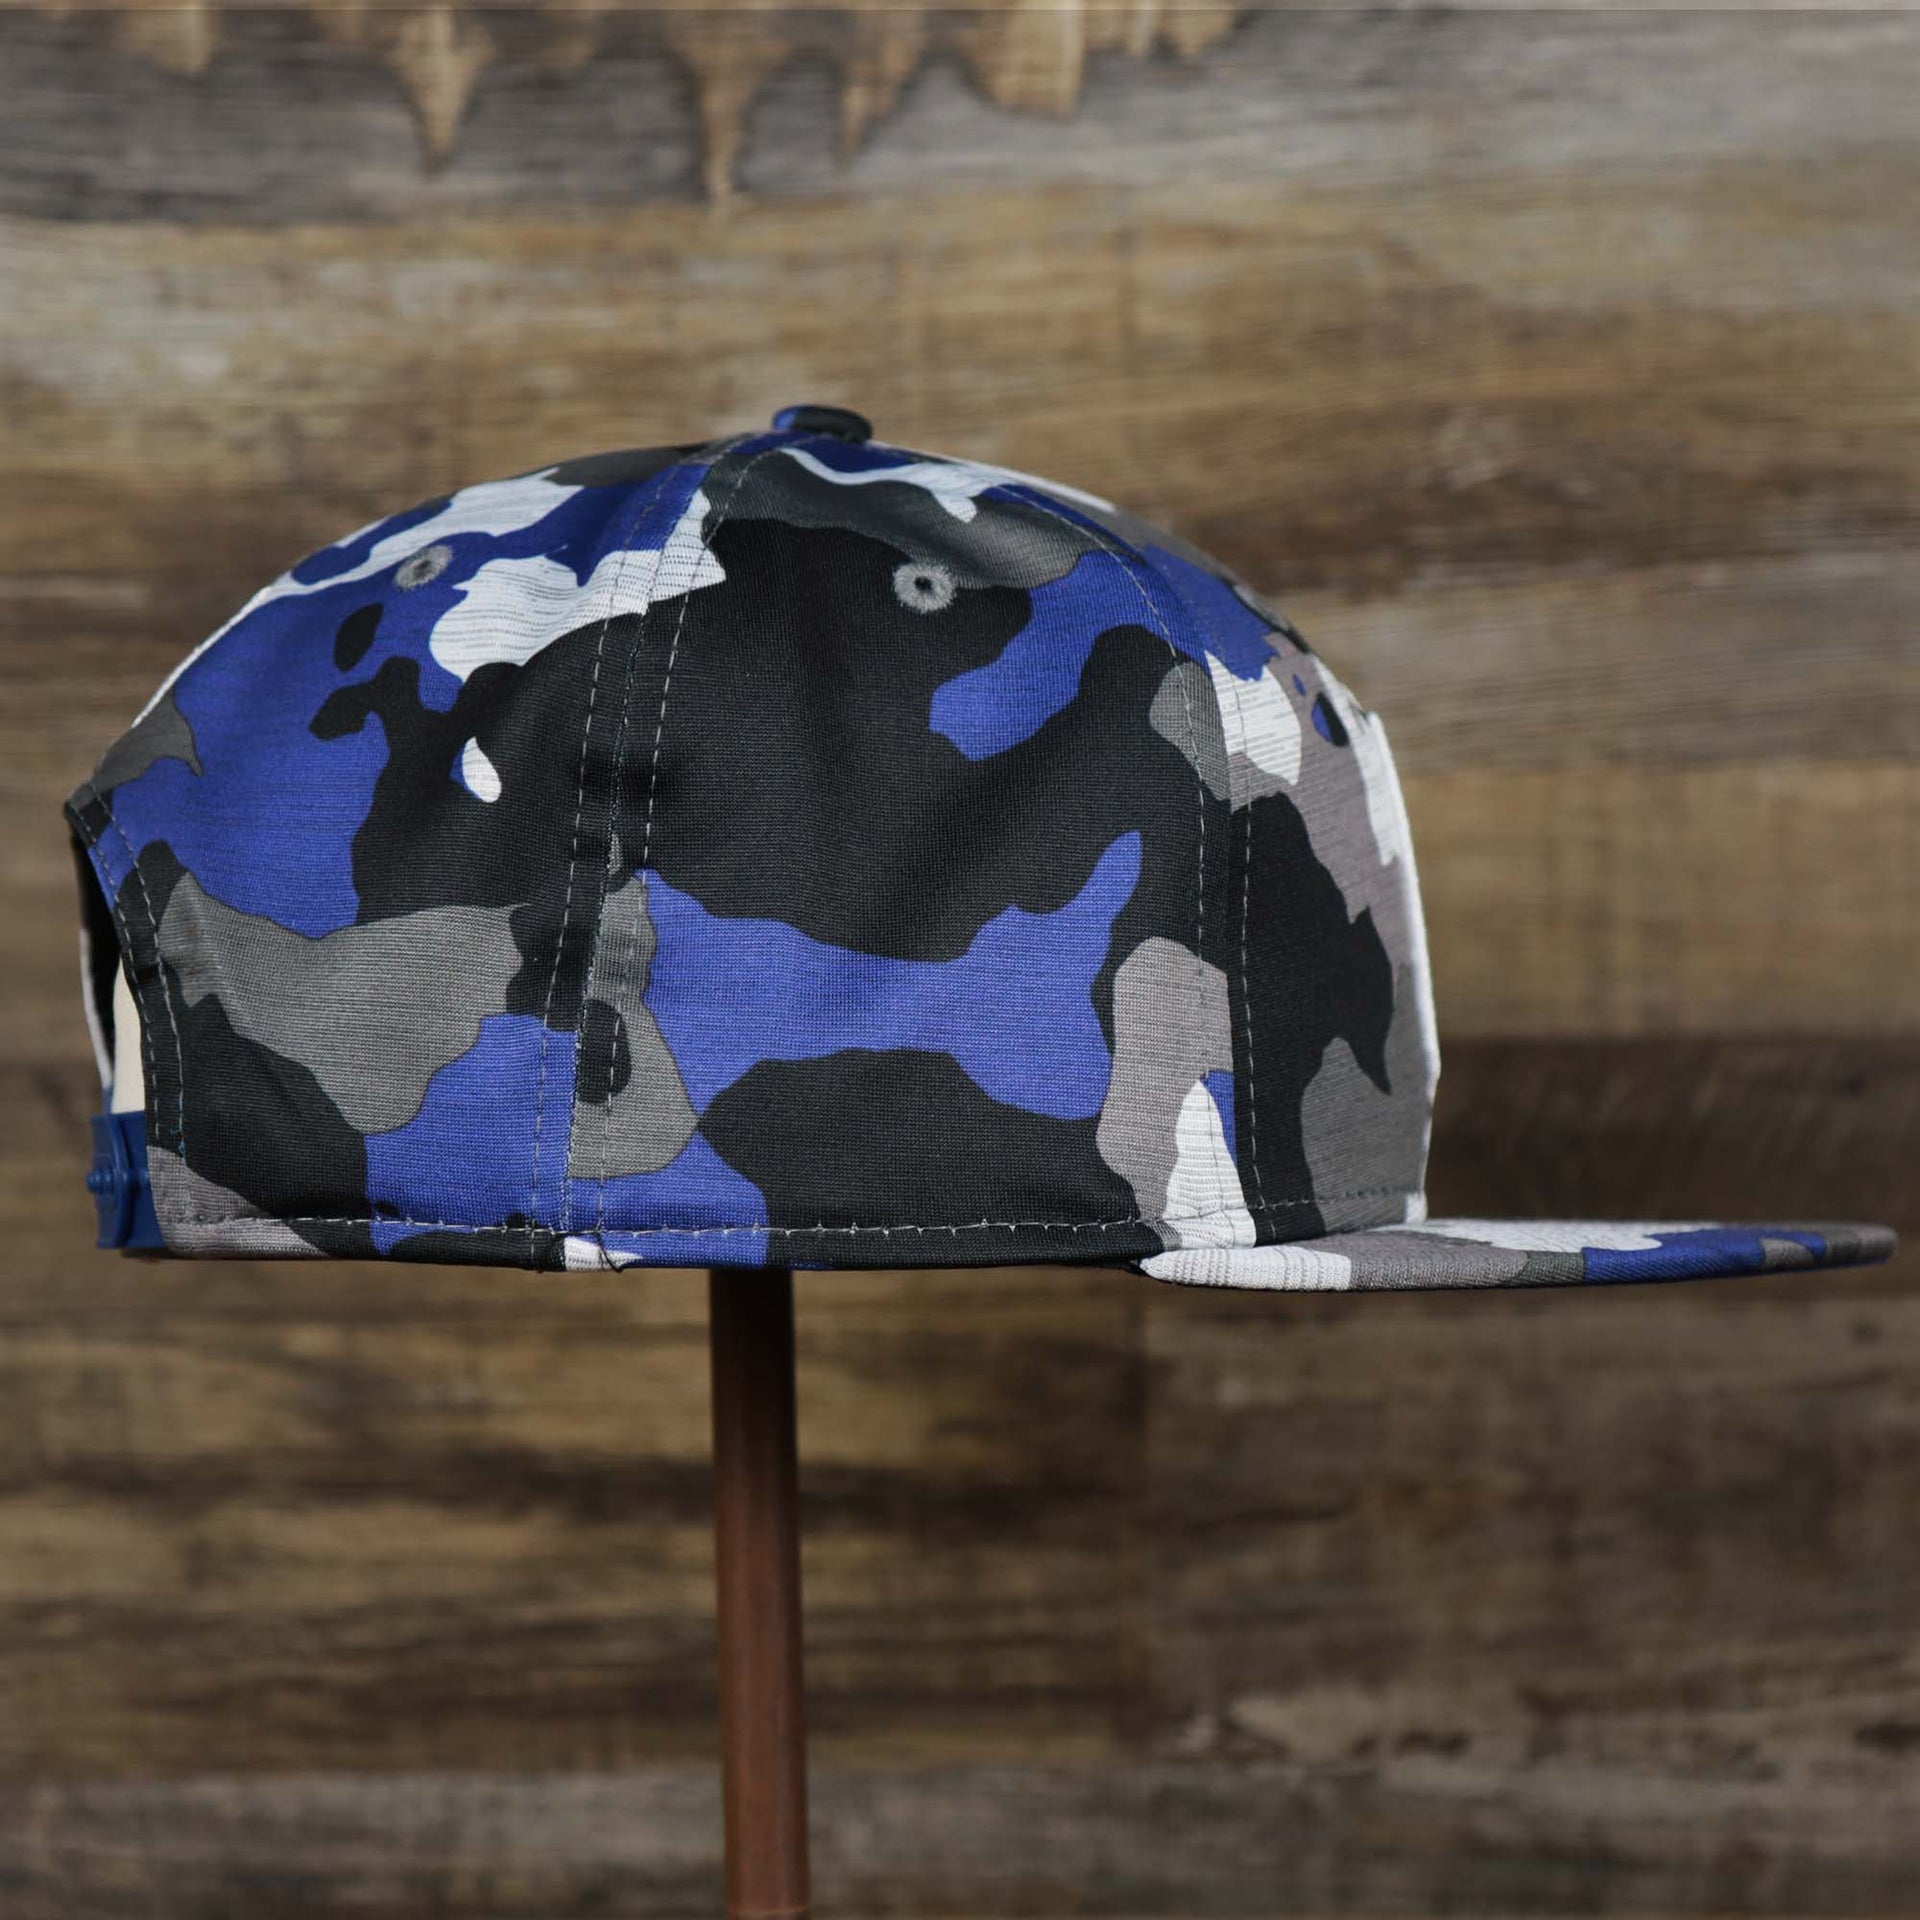 The Wearer's Right on the NFL Logo OnField Summer Training 2022 Camo 9Fifty Snapback | Royal Blue Camo 9Fifty